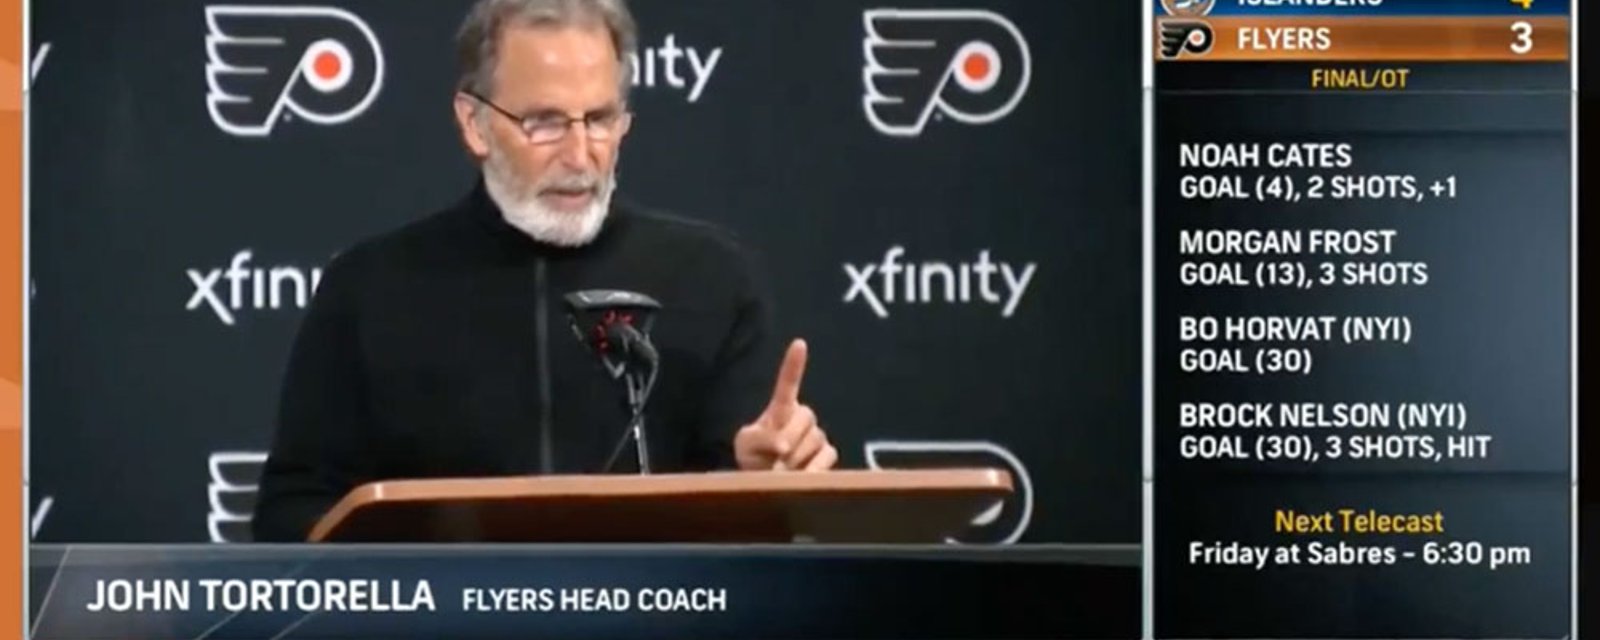 Tortorella comes out swinging in his post-game press conference